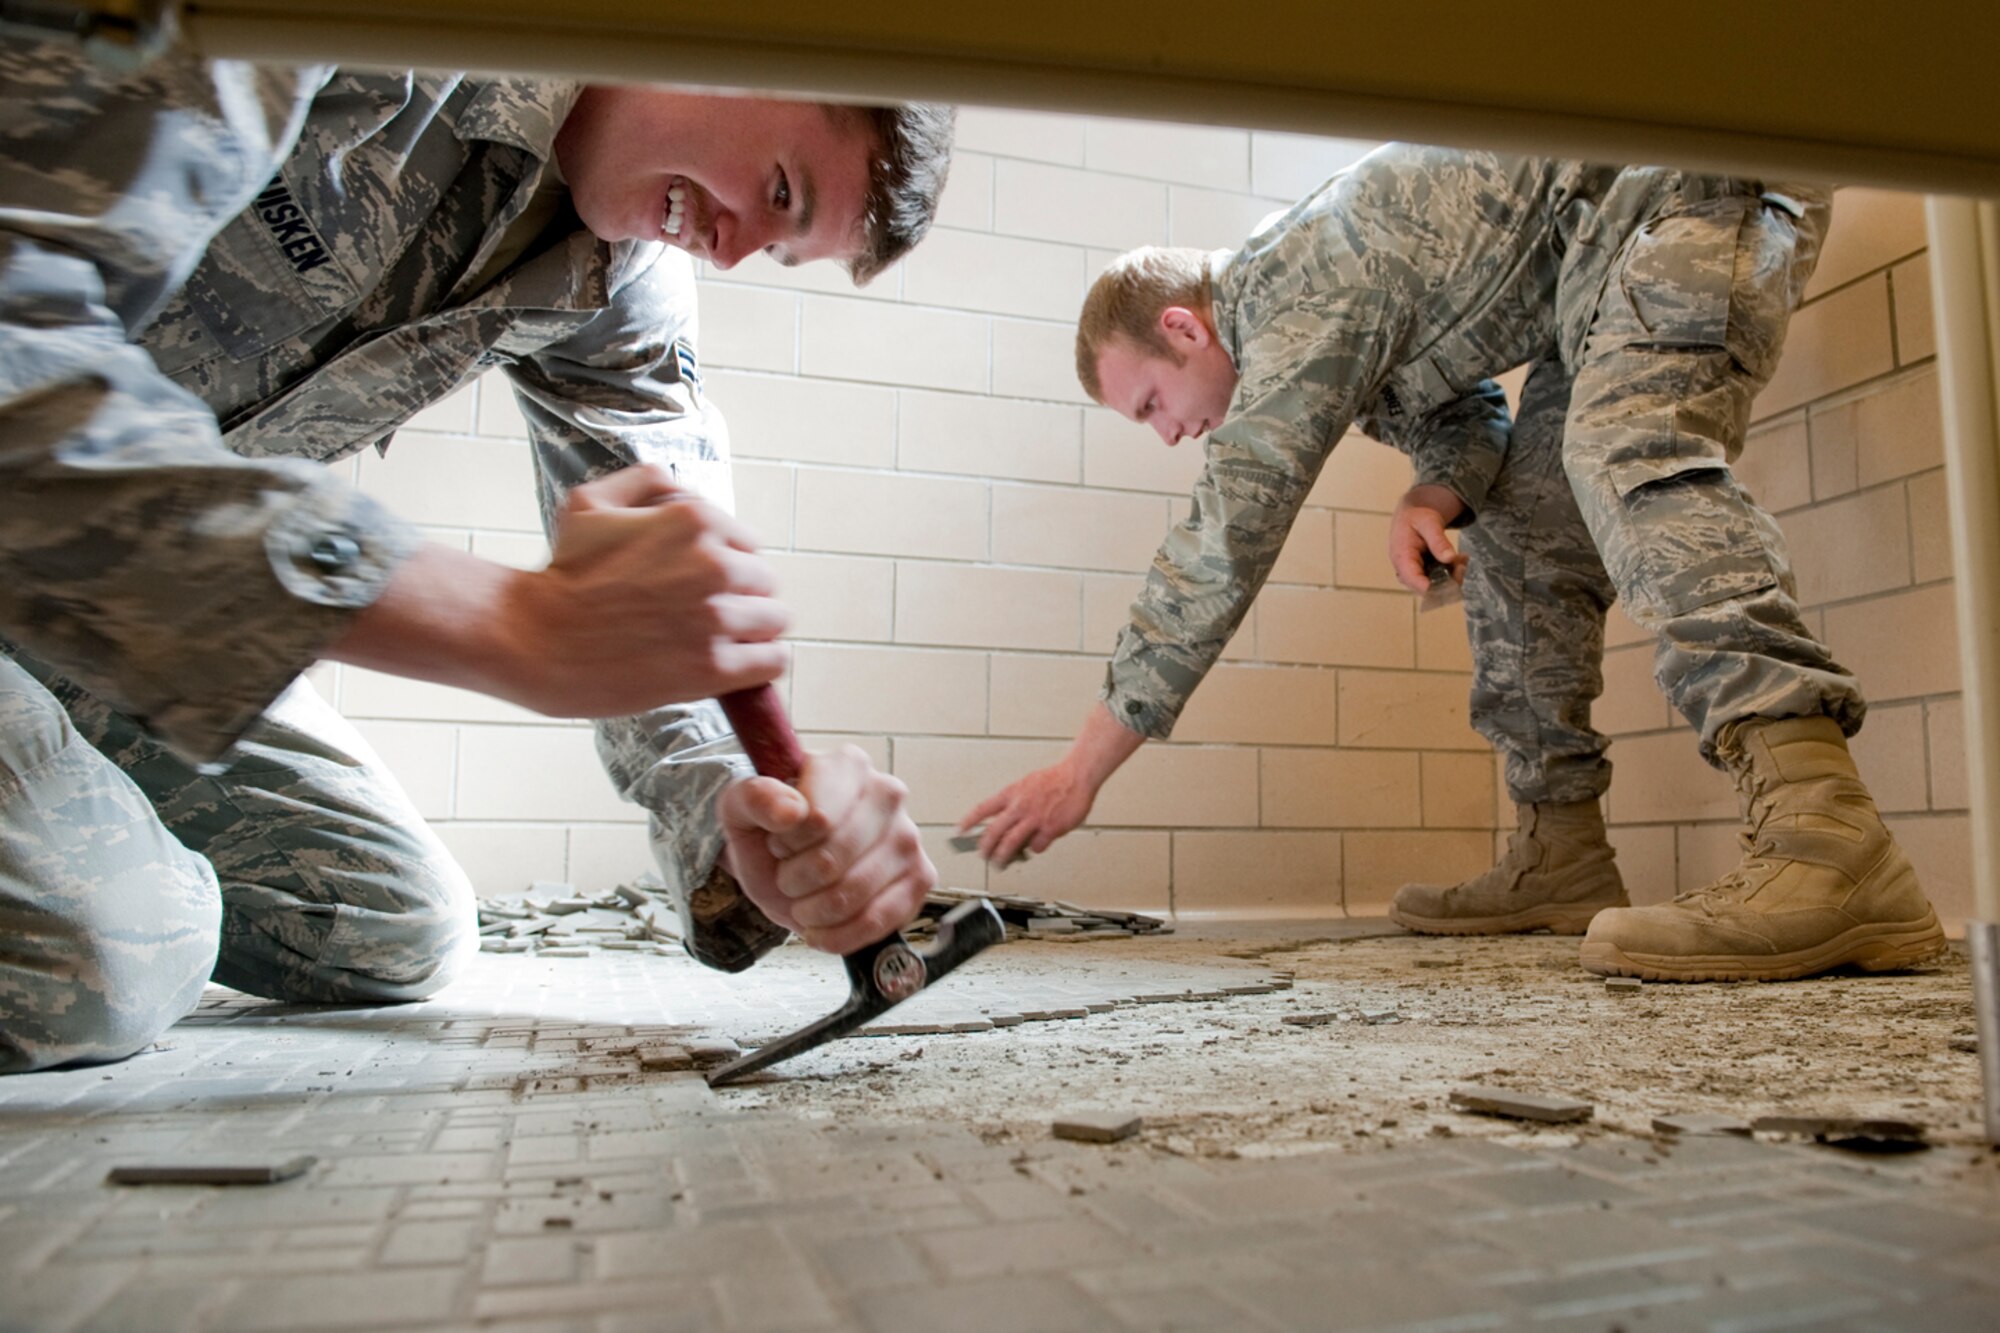 HOLLOMAN AIR FORCE BASE, N.M. -- Airmen 1st Class Tyler Huisken and Benjamin Brady, both members of the 49th Civil Engineer Squadron, remove tile at the 746th Test Squadron facility Feb. 16, 2011. Members of the 49th CES responded to and repaired more than $3 million in damages caused by a record-breaking February snow storm. There were 145 buildings in the industrial area of the base that suffered damage from freezing. (U.S. Air Force photo by Senior Airman Veronica Stamps/ Released)
